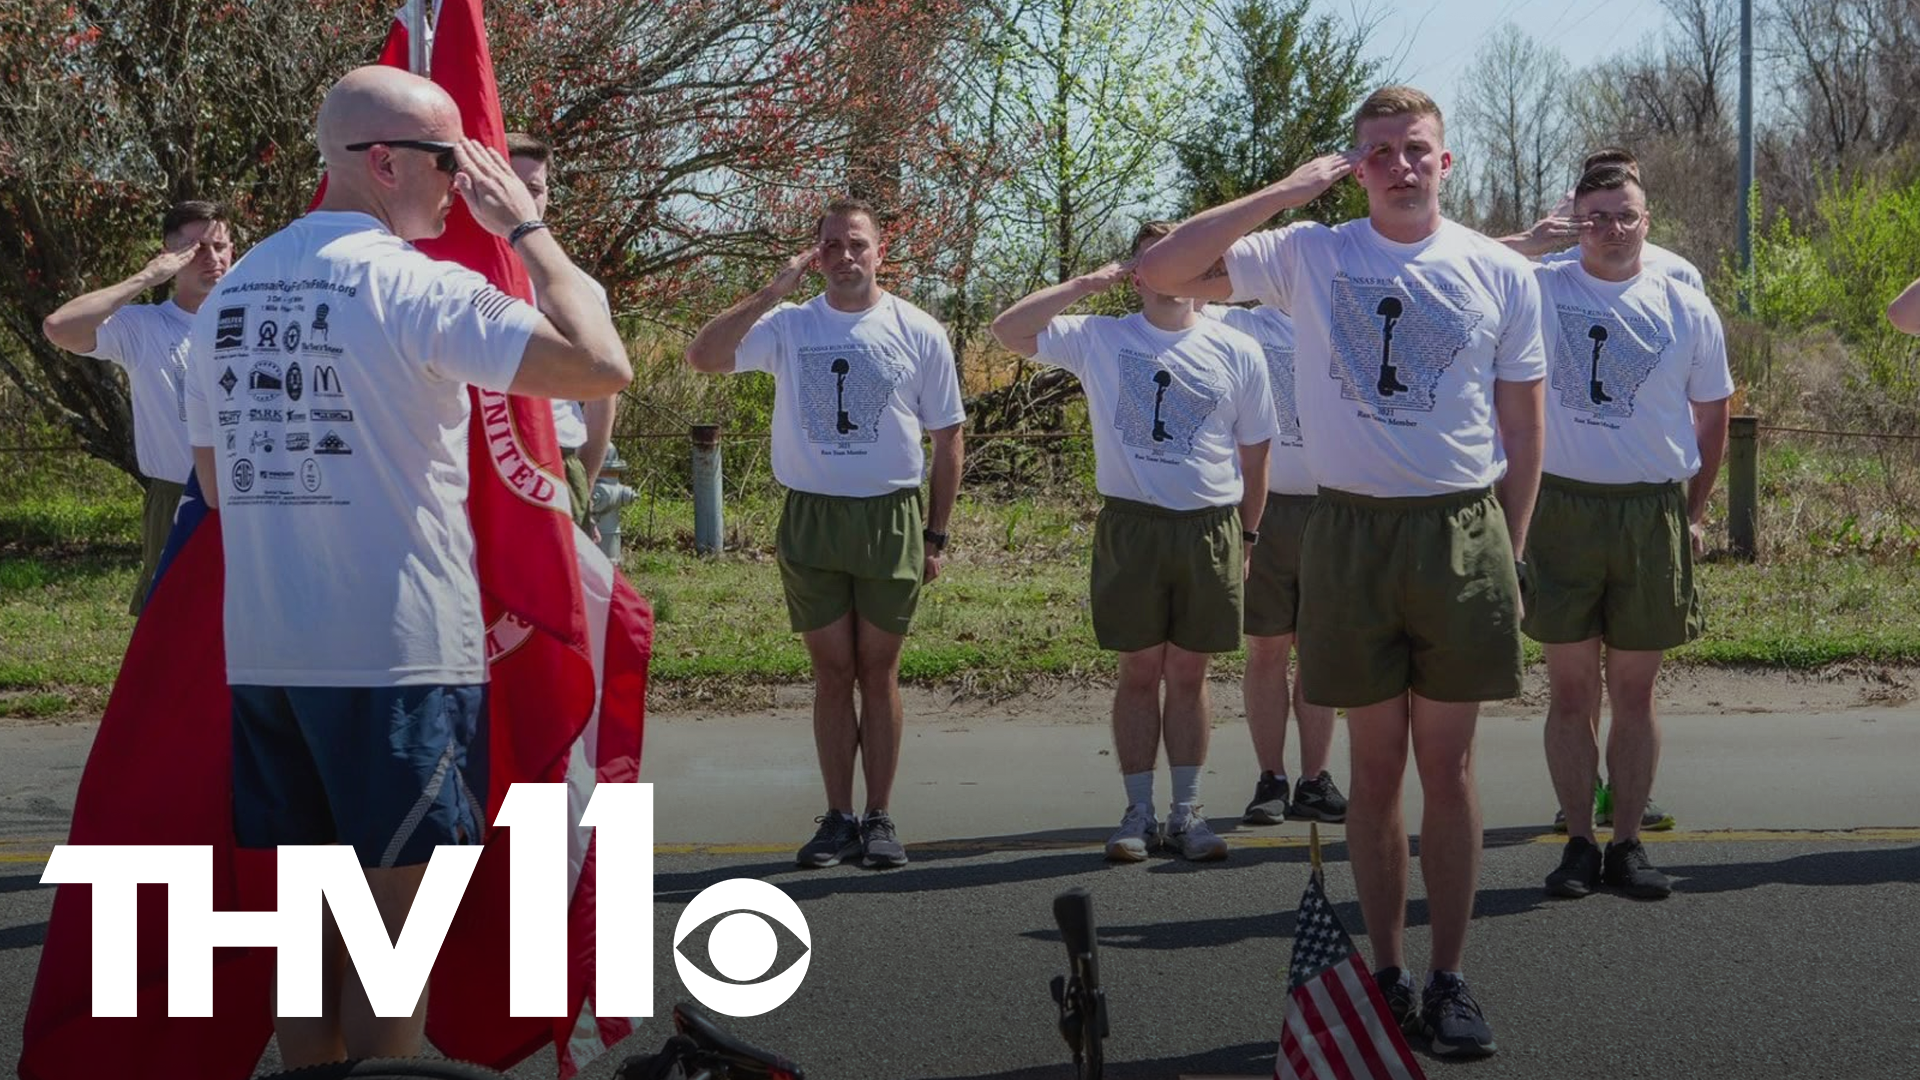 Rob Evans introduces you to a local nonprofit that honors veterans in Arkansas by putting on an annual run and other events.